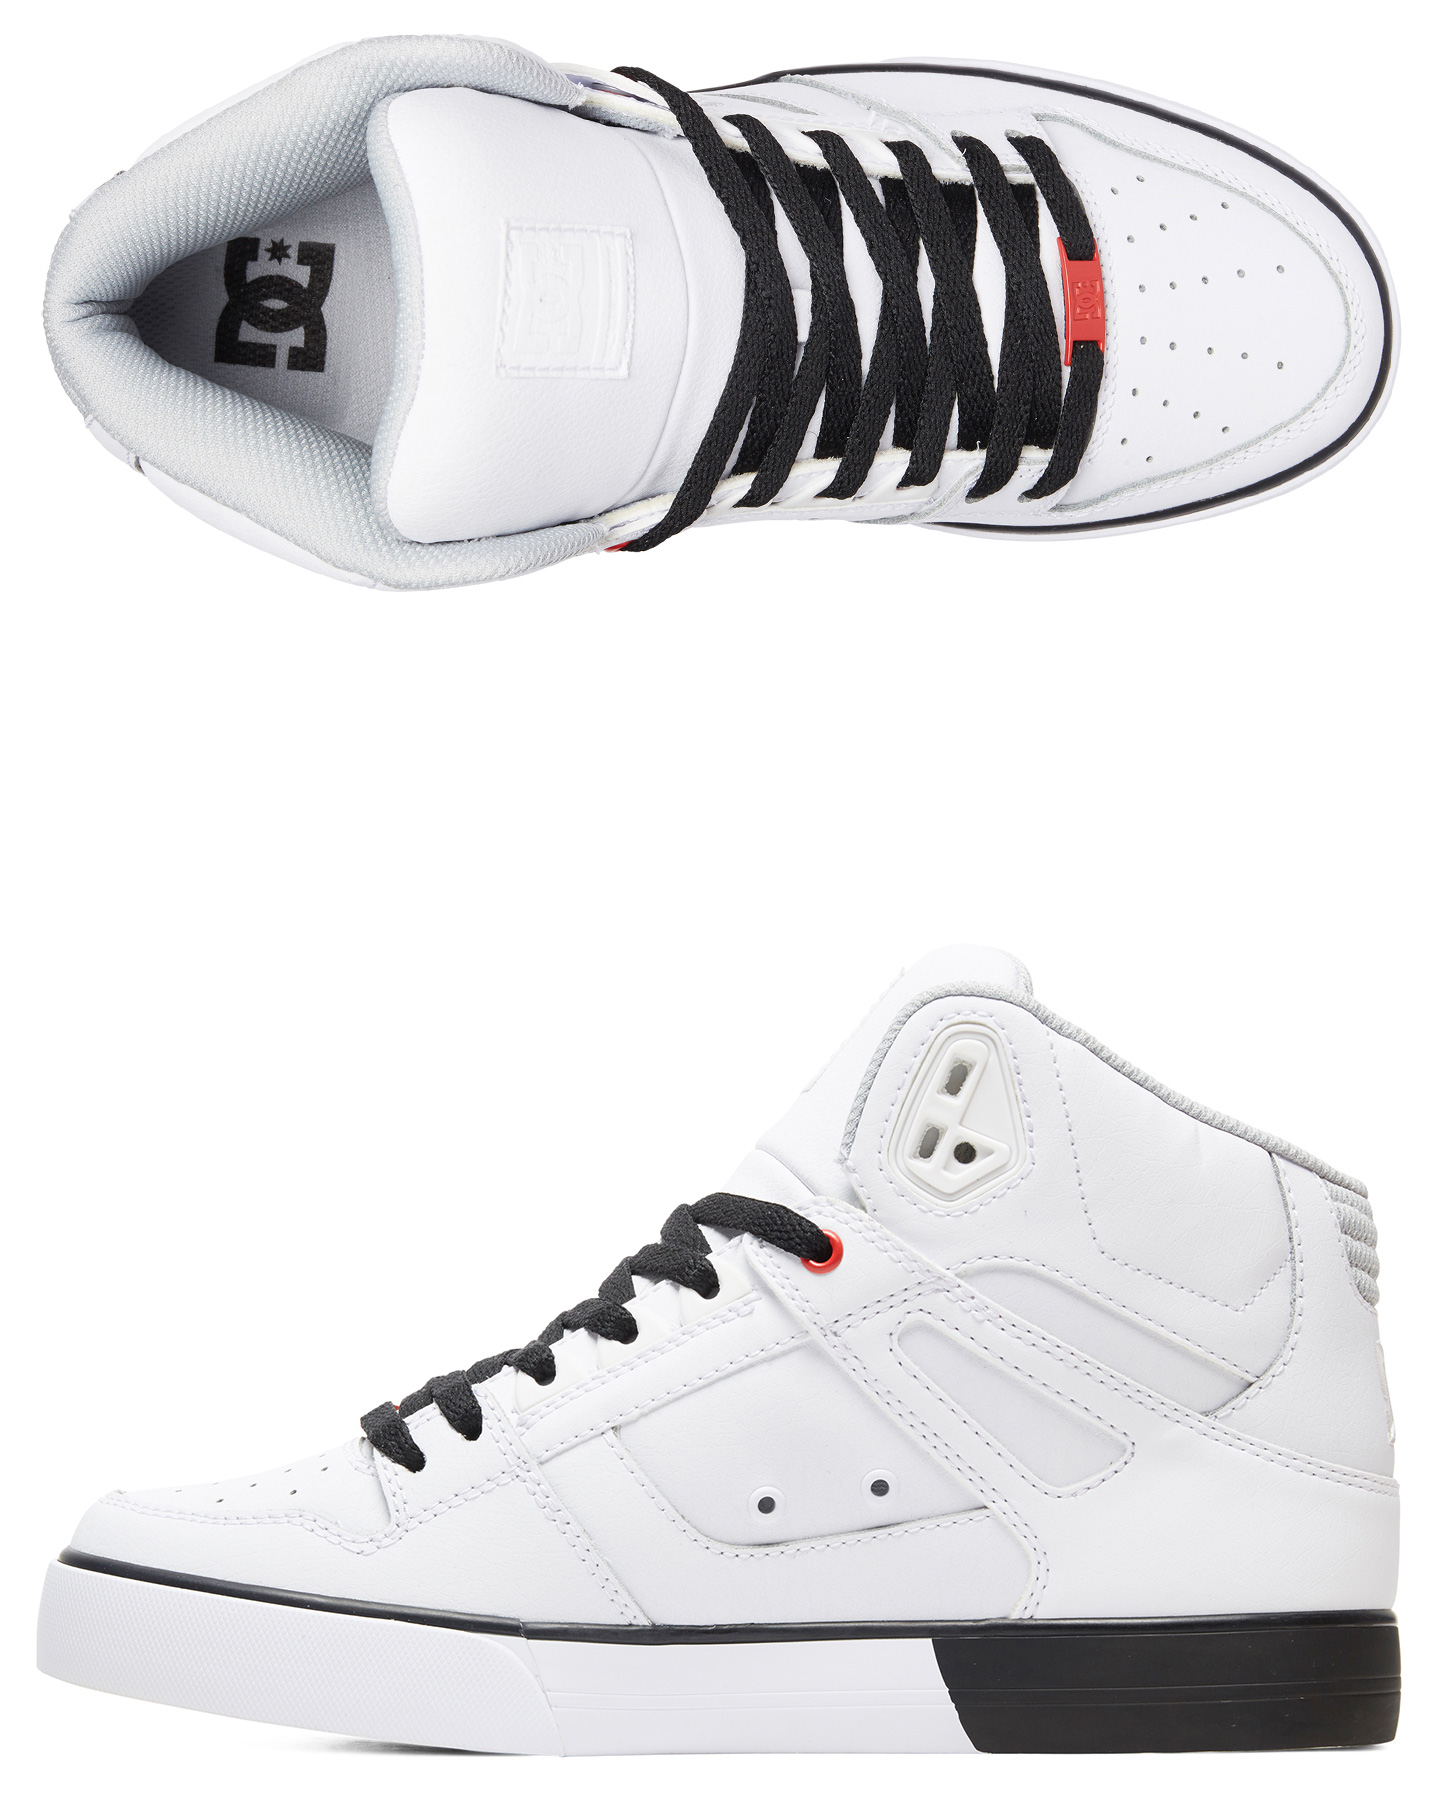 mens wide high top shoes